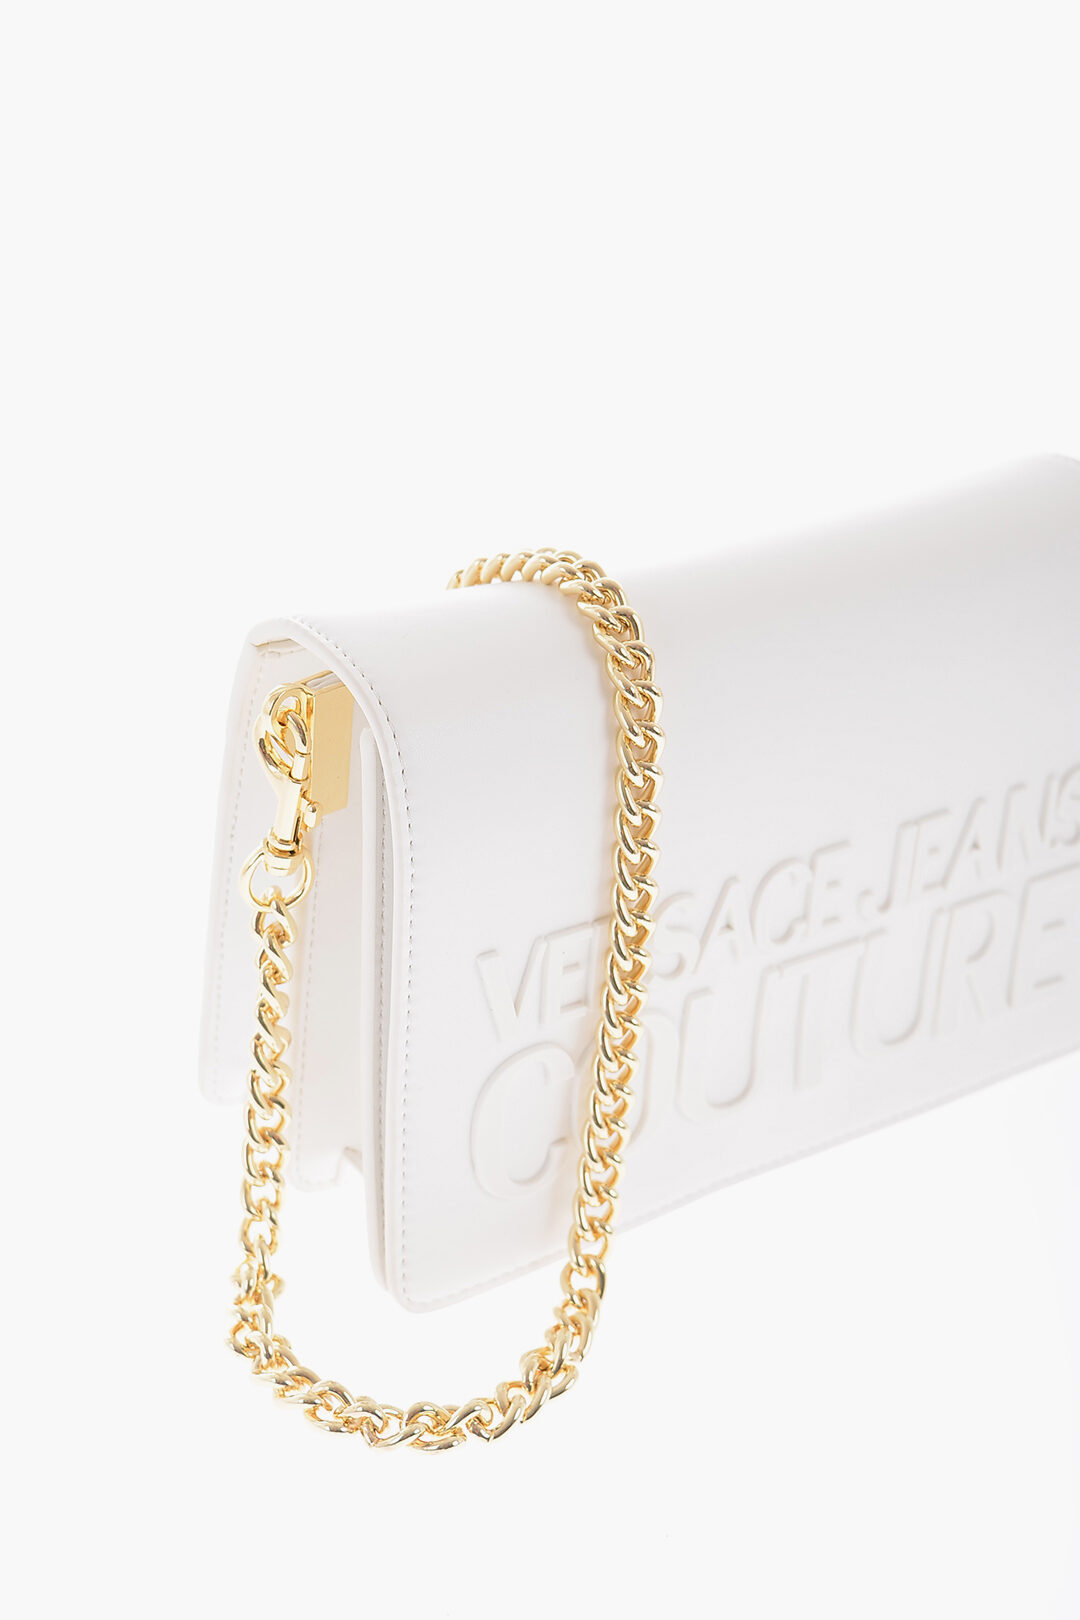 Versace Jeans Couture White & Gold Chain Couture Bag